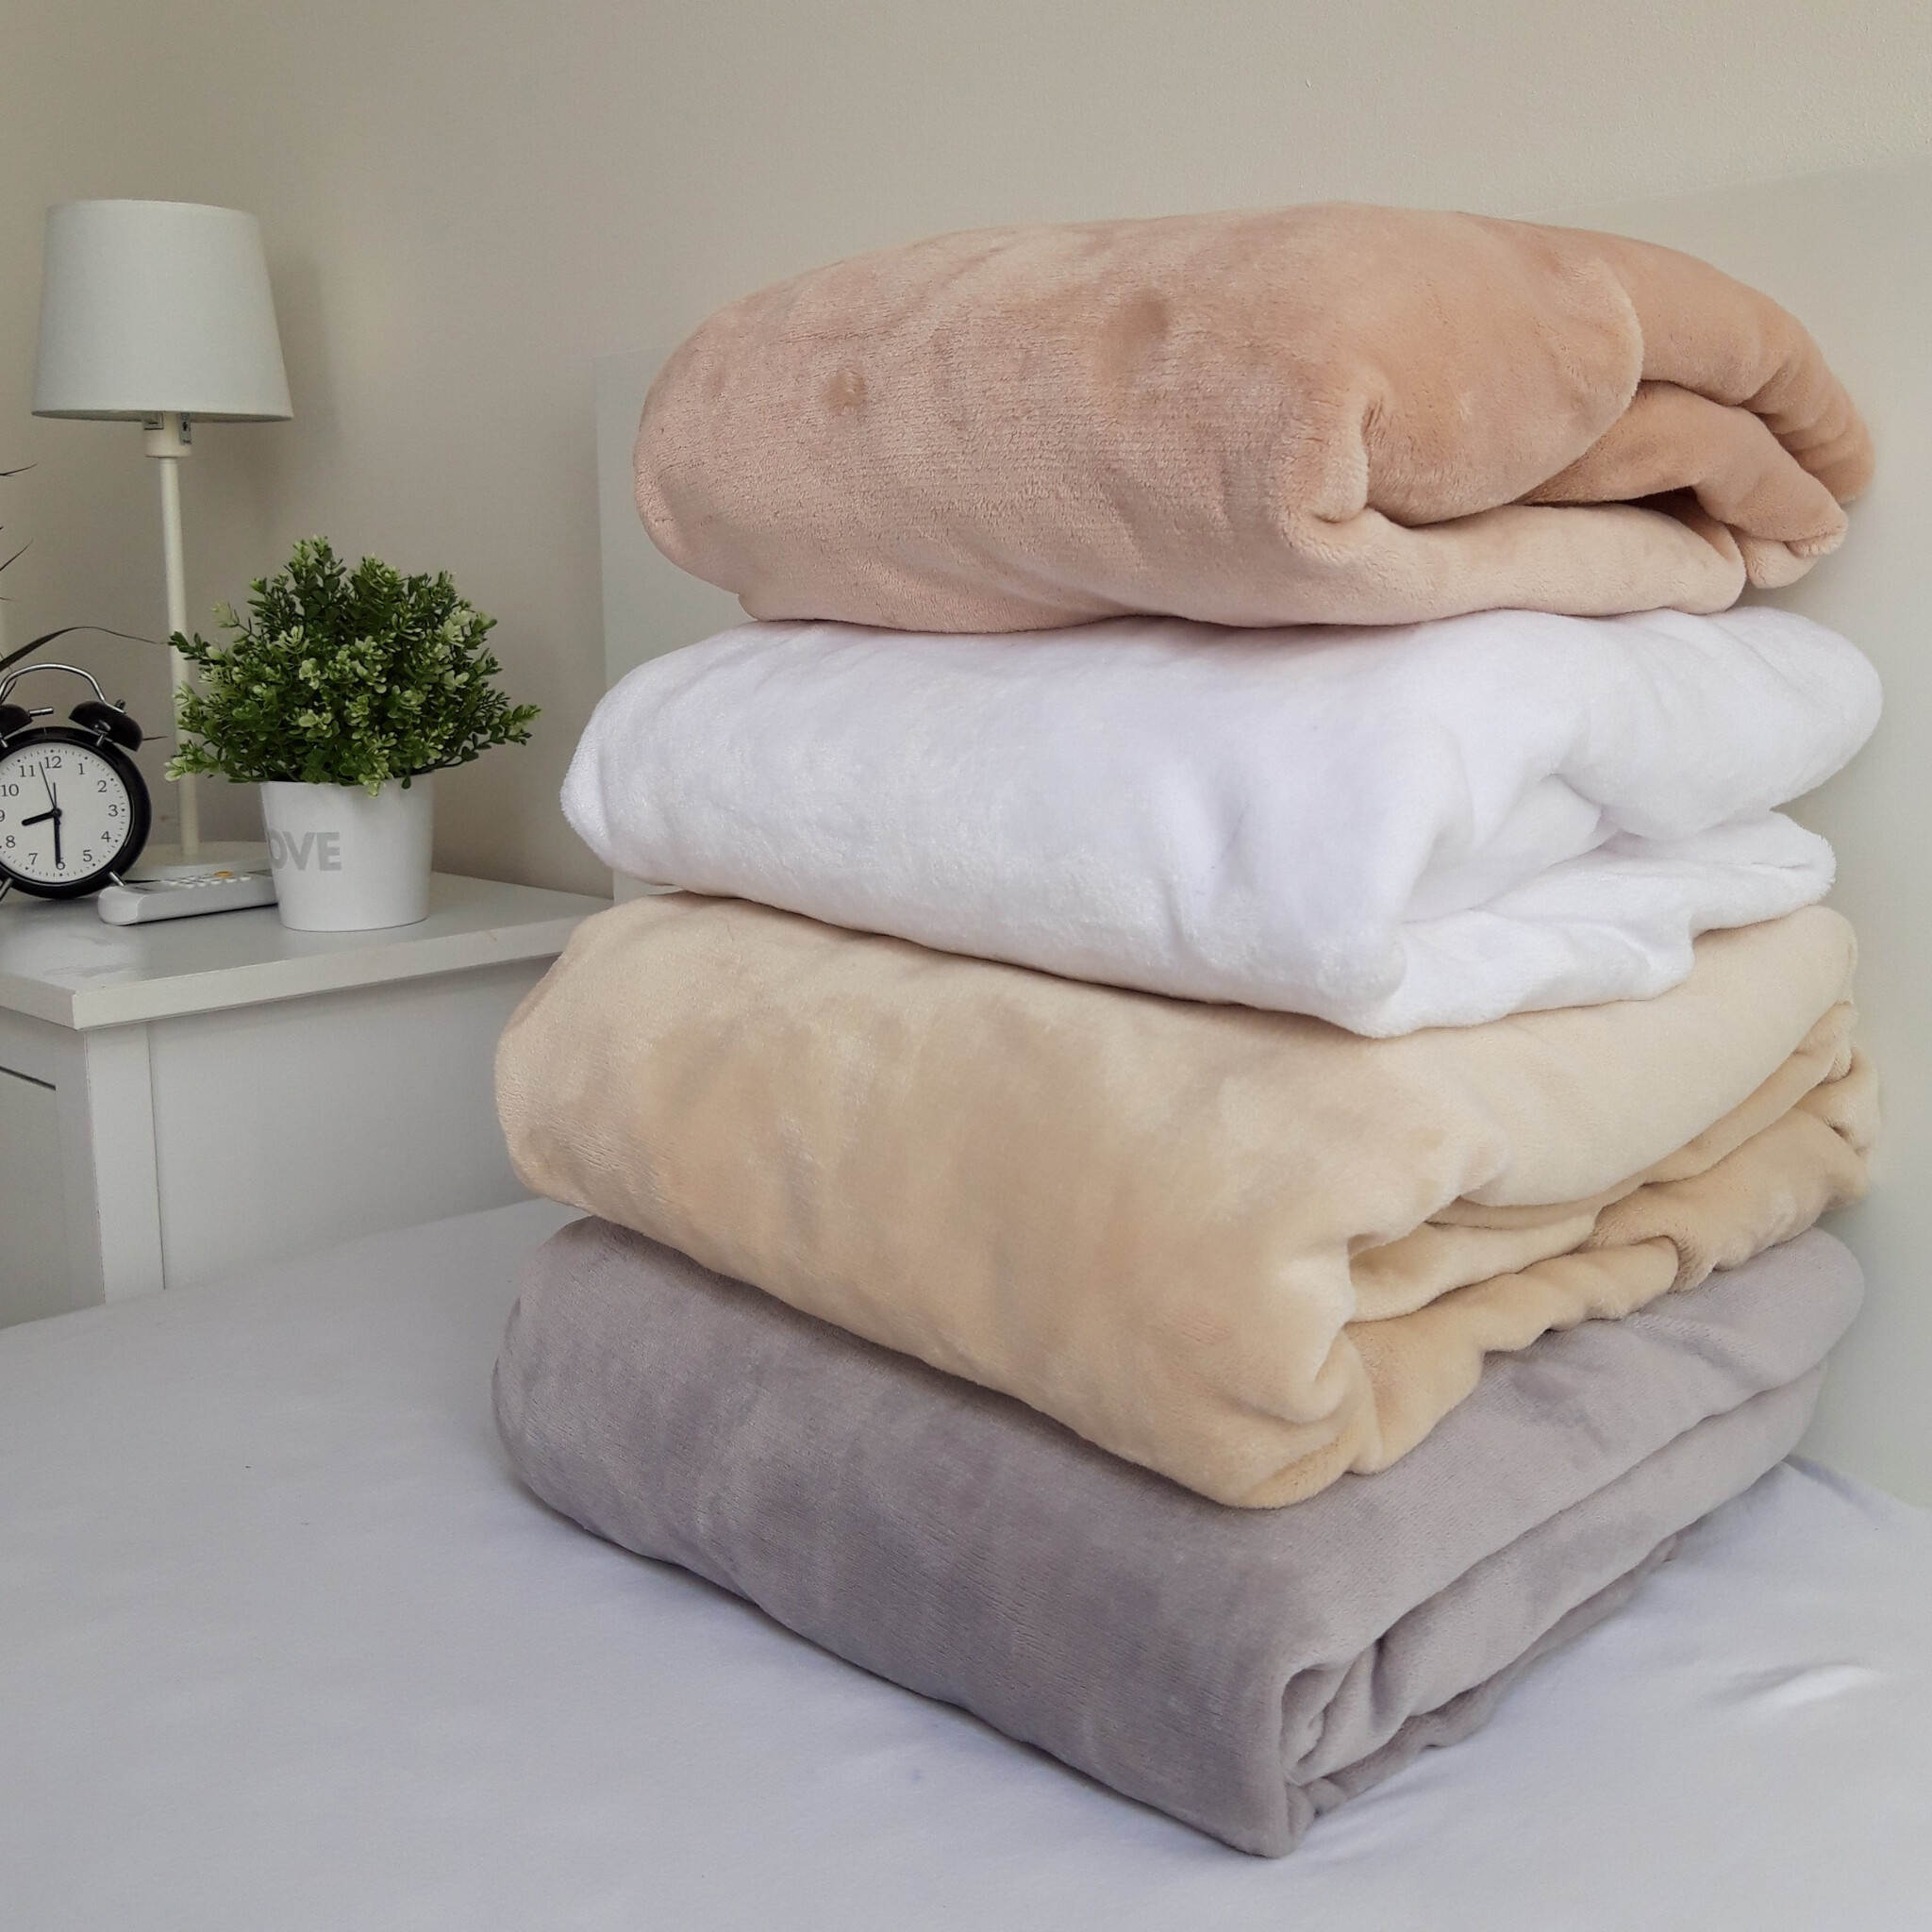 Sweet Home Fleece Teddy Fitted Sheet, White - 90 x 200 cm - Polyester